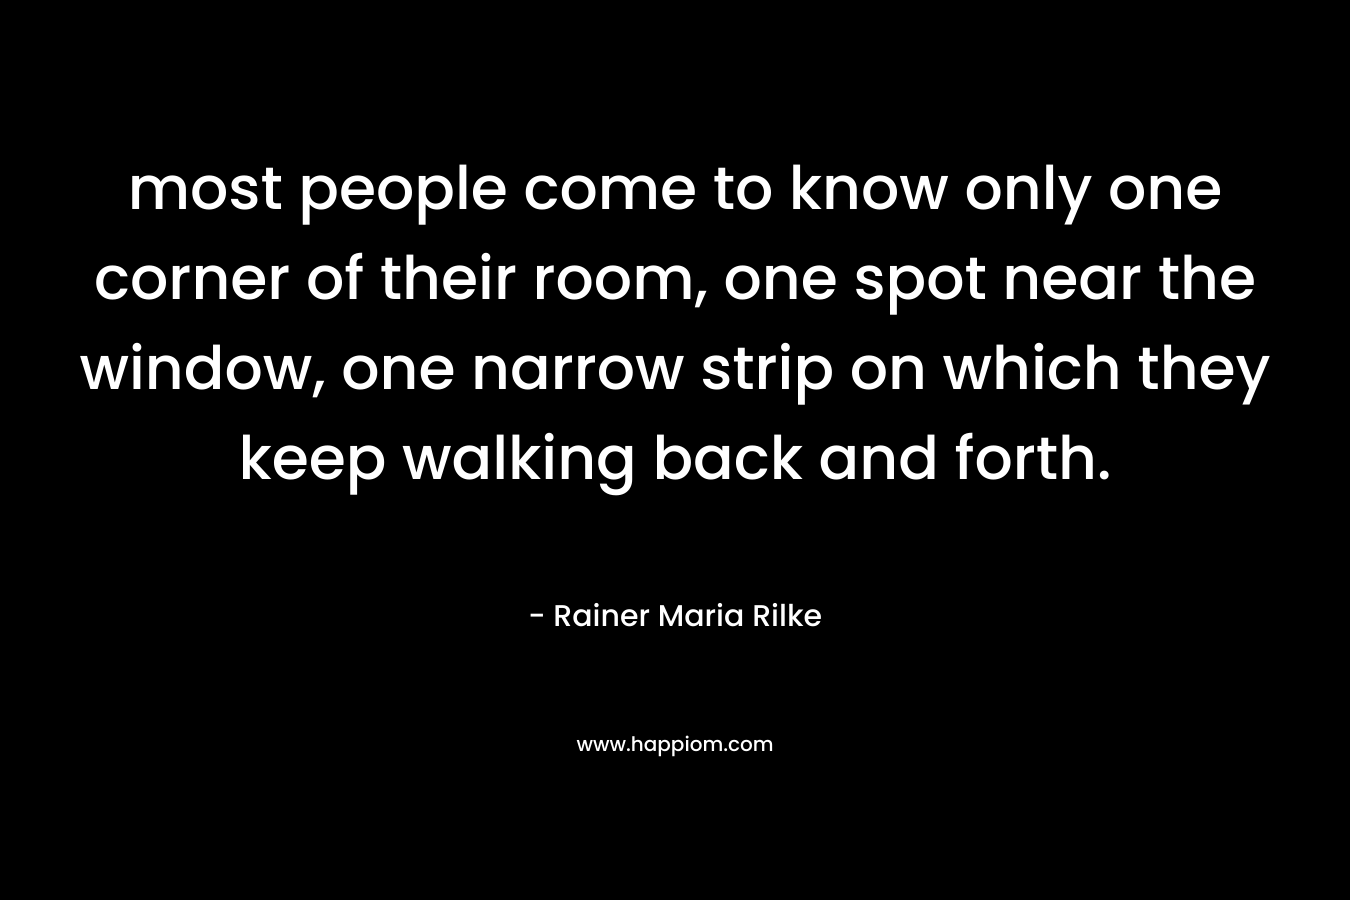 most people come to know only one corner of their room, one spot near the window, one narrow strip on which they keep walking back and forth.